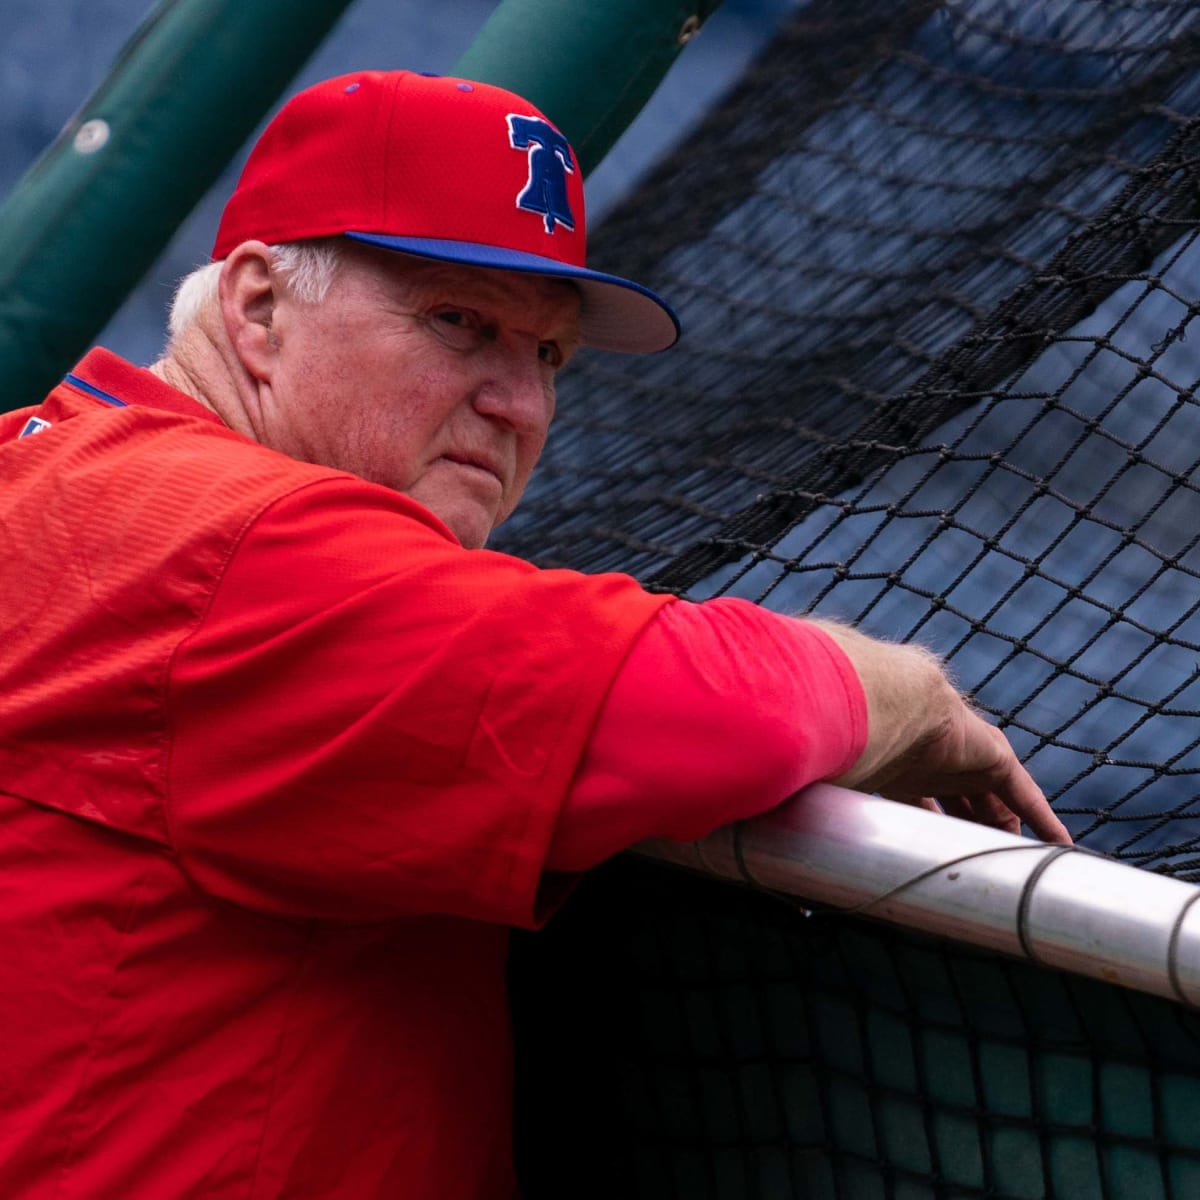 Charlie Manuel, who managed Phillies to World Series title, makes